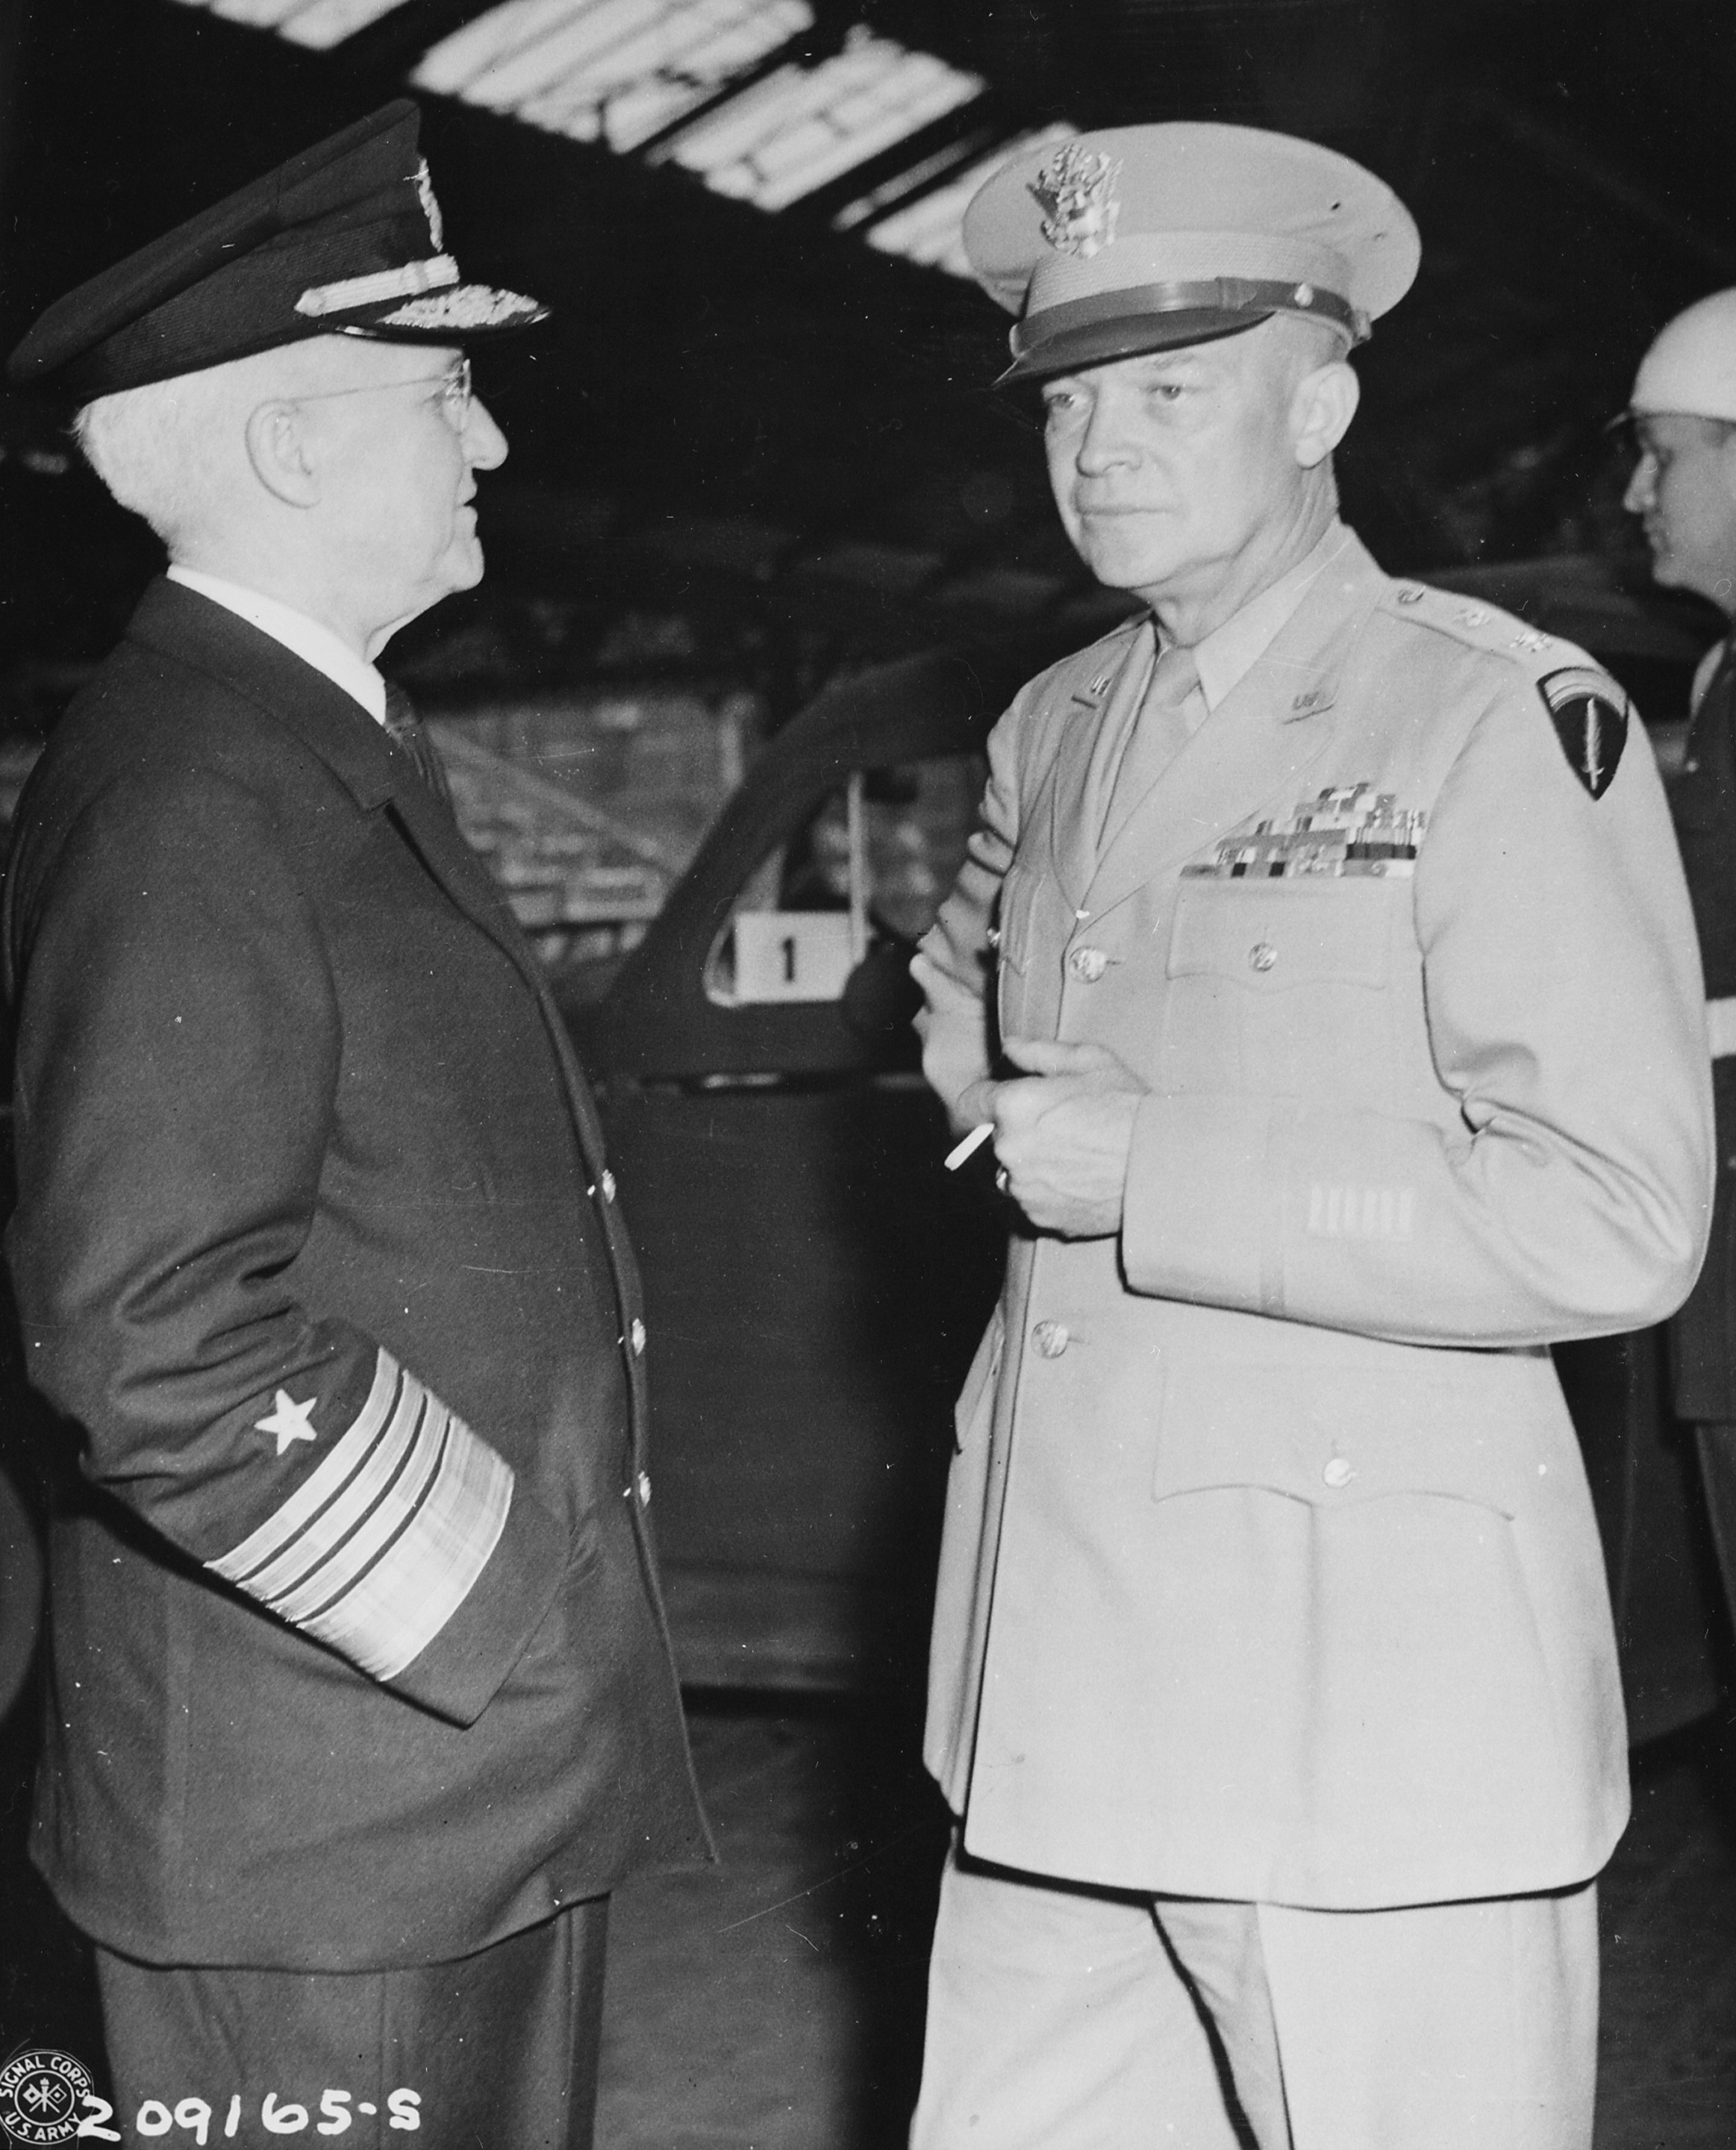 Admiral Harold Stark and General Dwight Eisenhower at Antwerp, Belgium, 15 Jul 1945, photo 2 of 2; they were awaiting the arrival of US President Harry Truman, en route for the Potsdam Conference